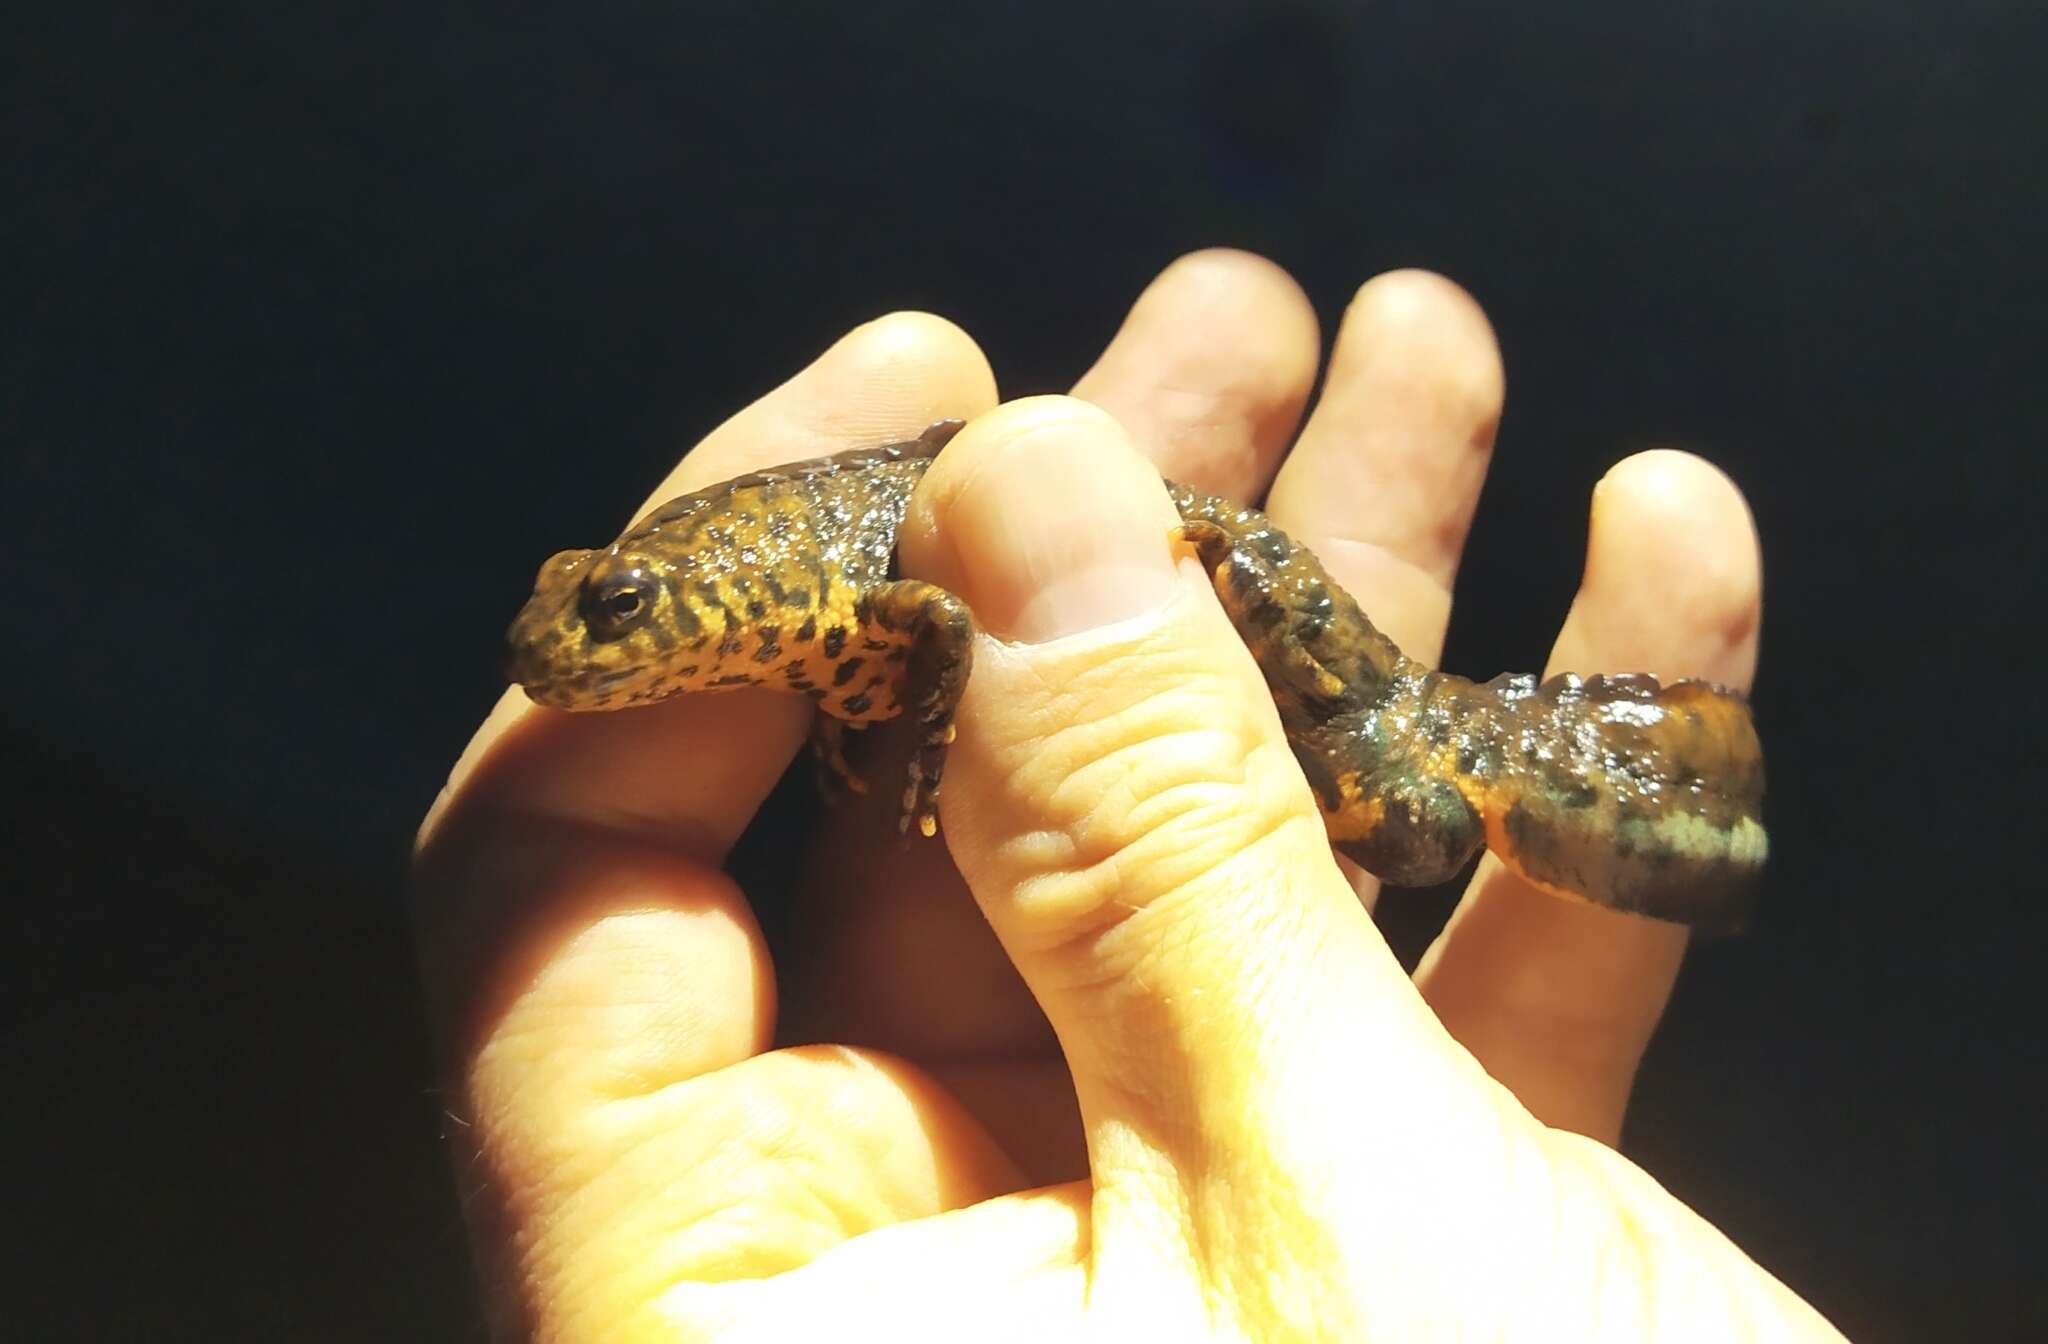 Image of Southern Crested Newt